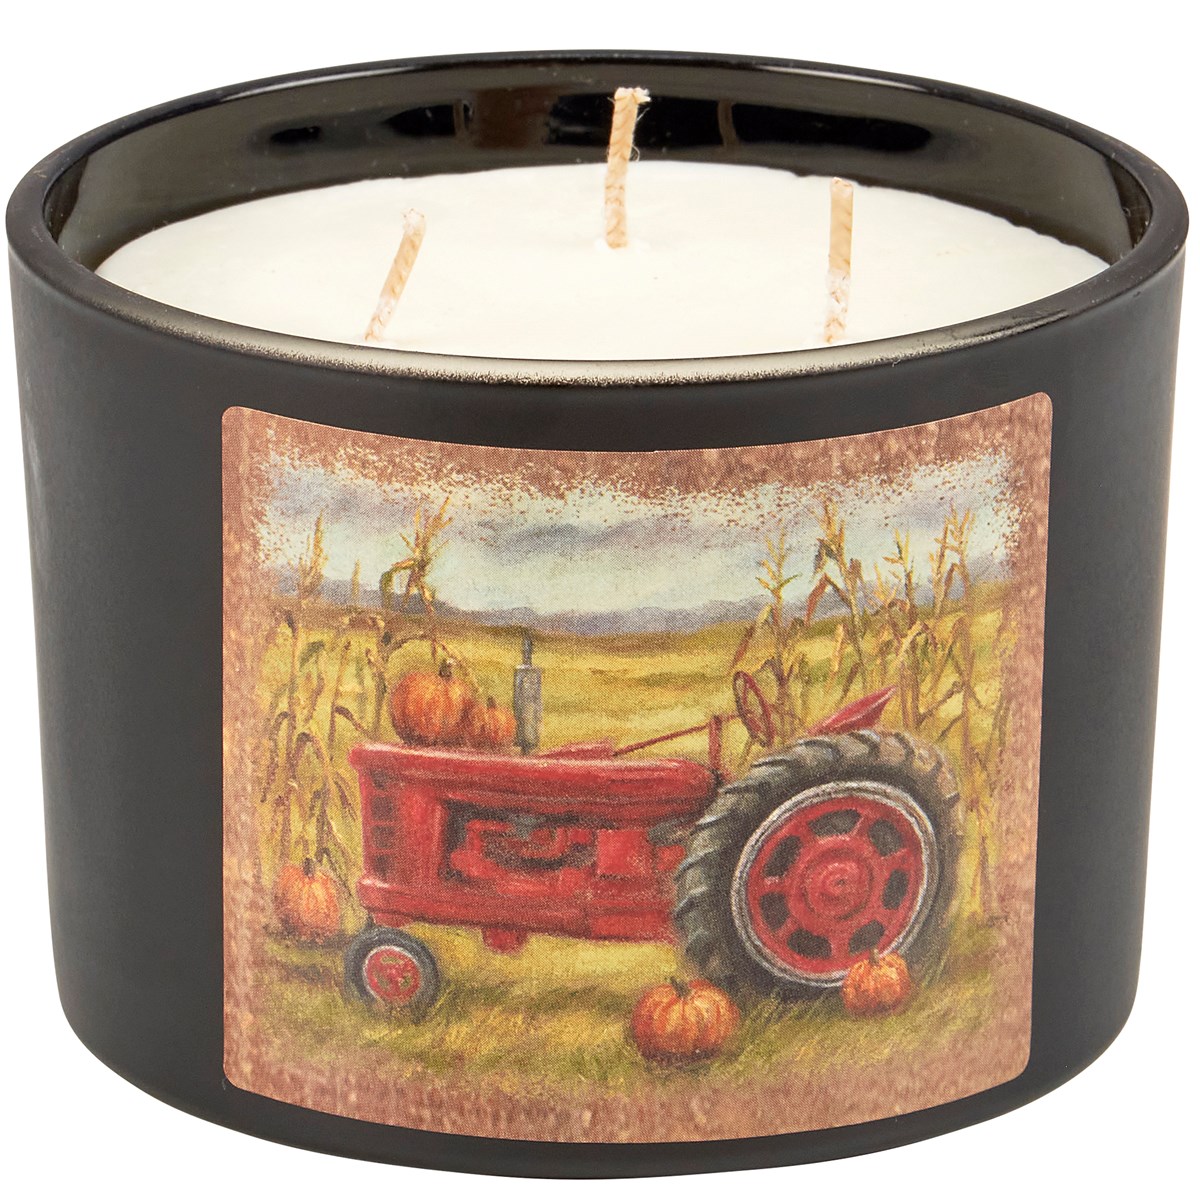 Fall Tractor Candle - Soy Wax, Glass, Cotton